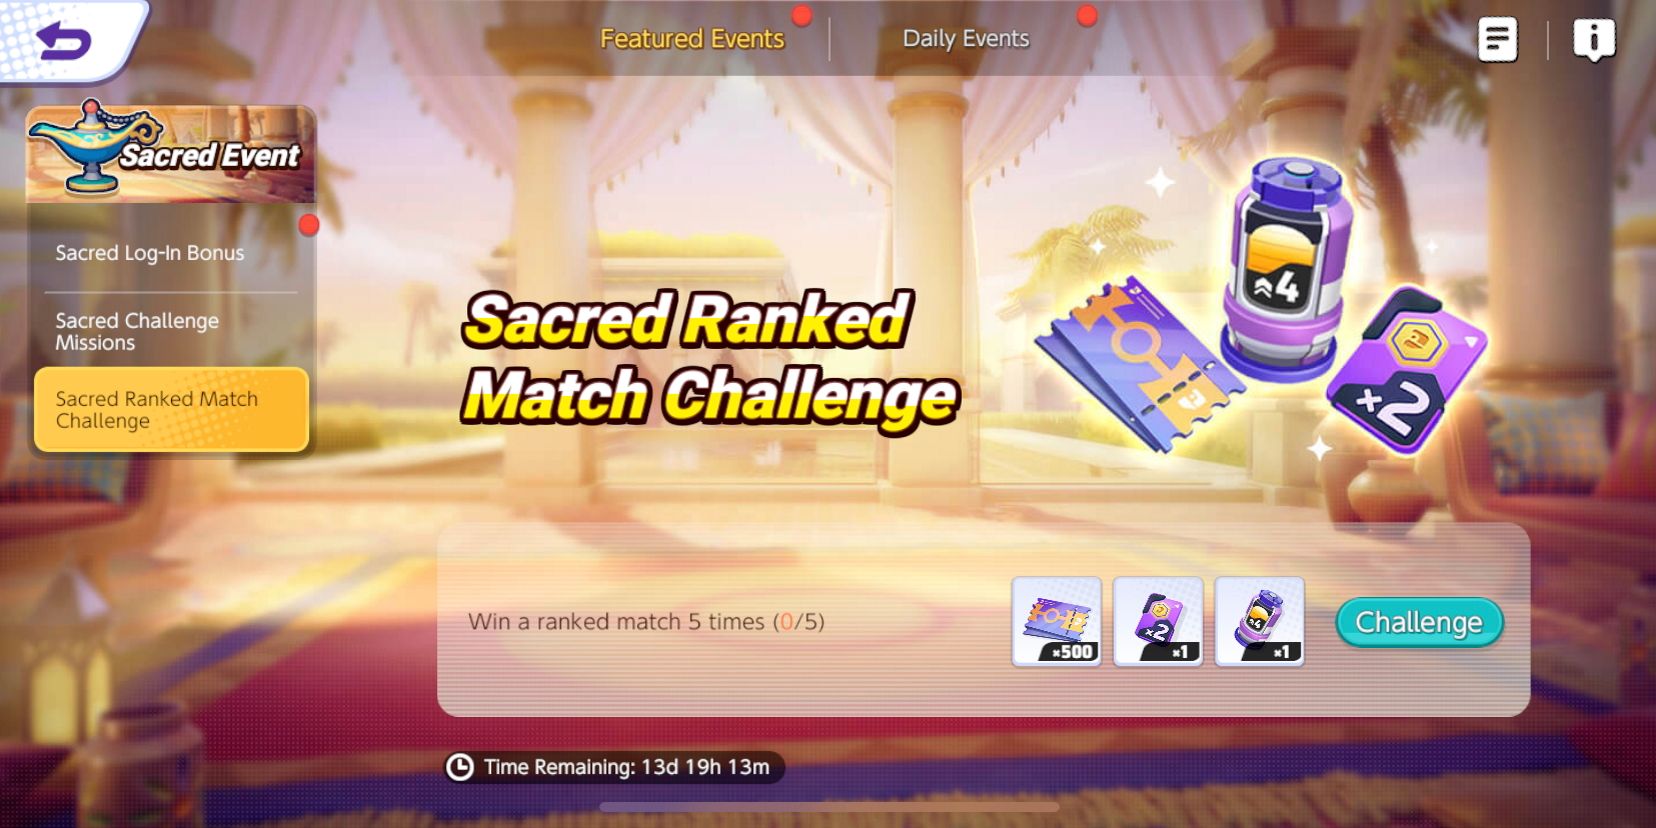 Pokemon Unite Sacred Event Ranked Match Challenge screen showing the different rewards